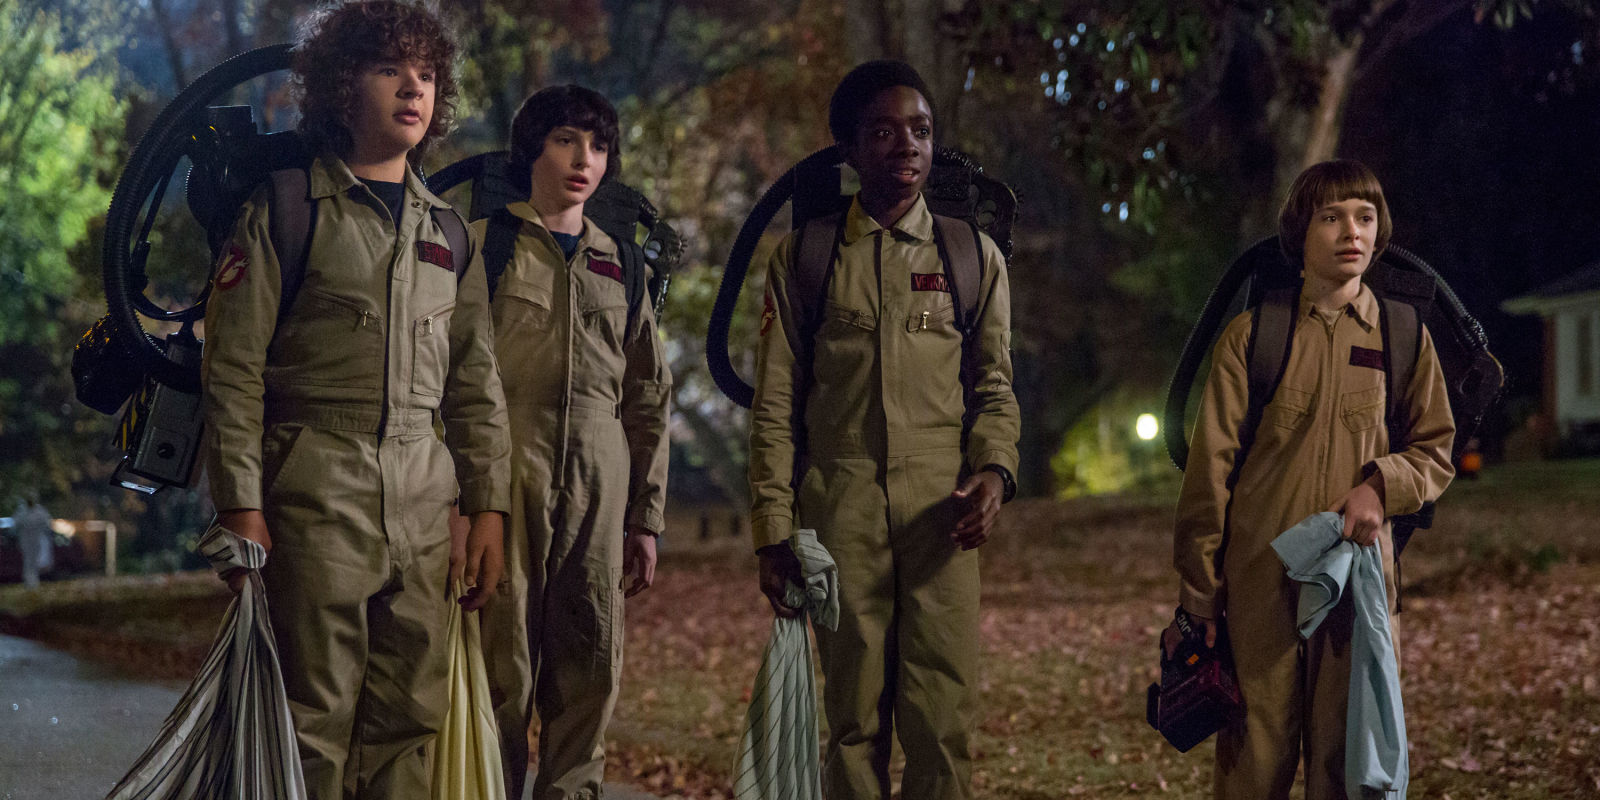 Gaten Matarazzo as Dustin, Finn Wolfhard as Mike, Caleb McLaughlin as Lucas, and Noah Schnapp as Will Byers dressed as Ghostbusters in STRANGER THINGS 2 (2017)